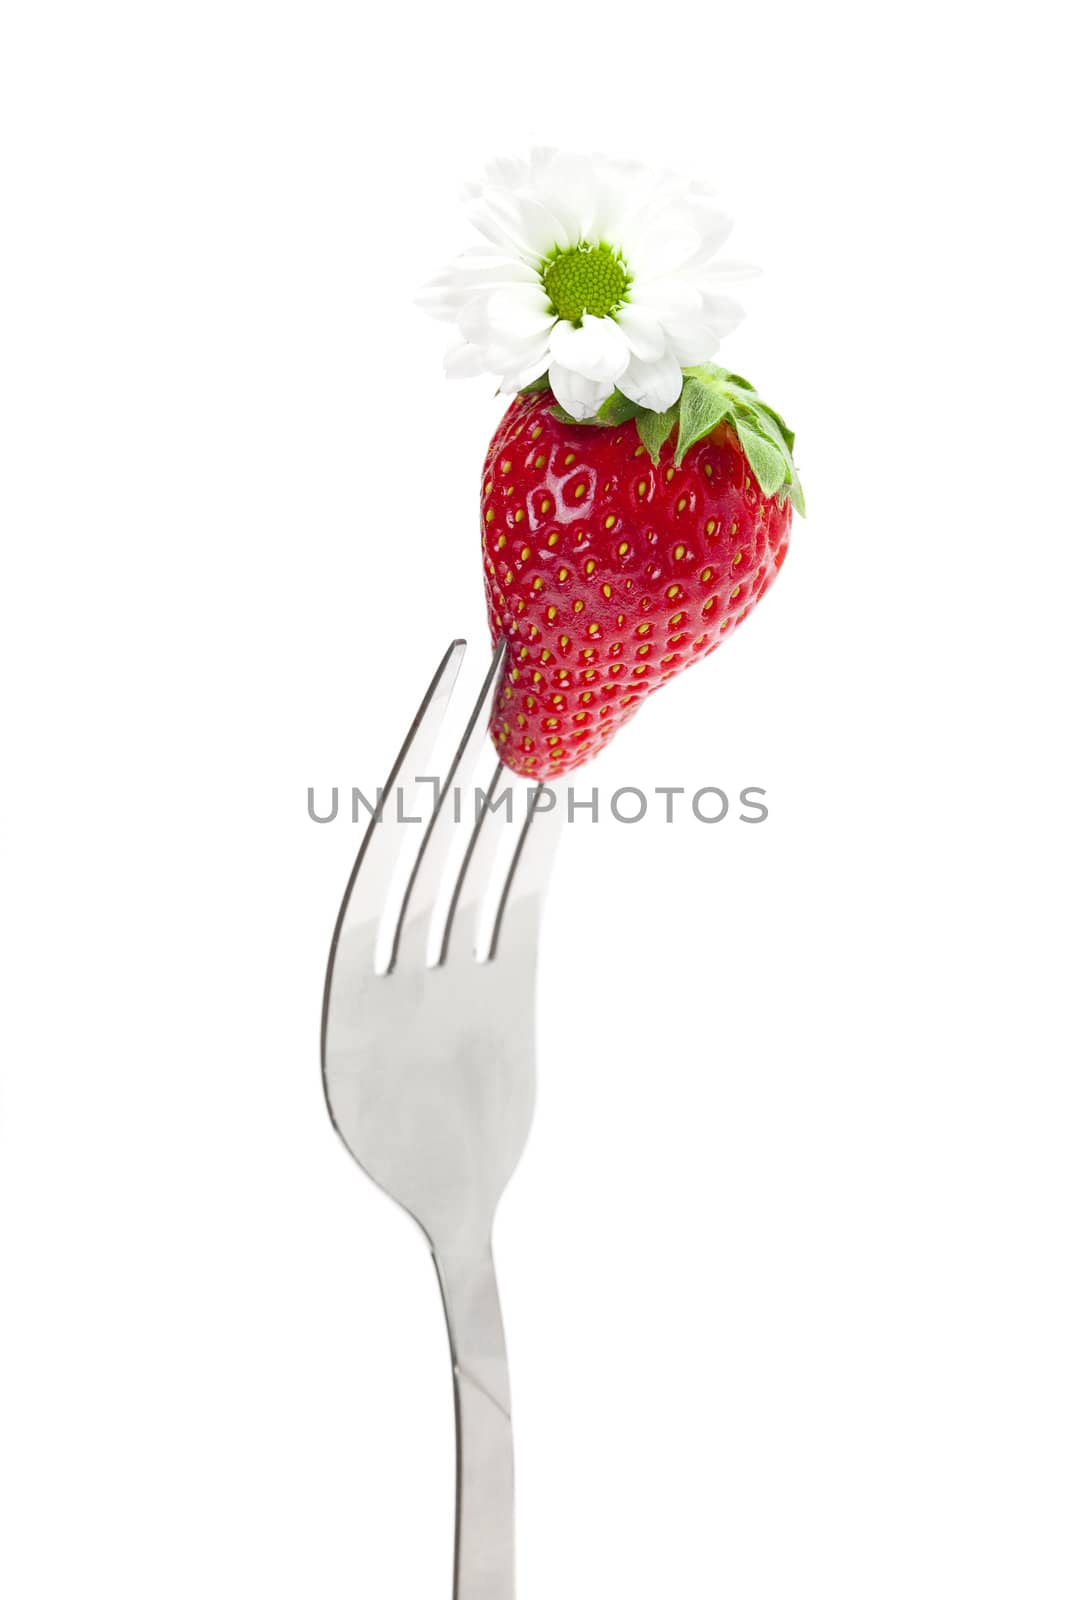 strawberry and flower on a fork isolated on white